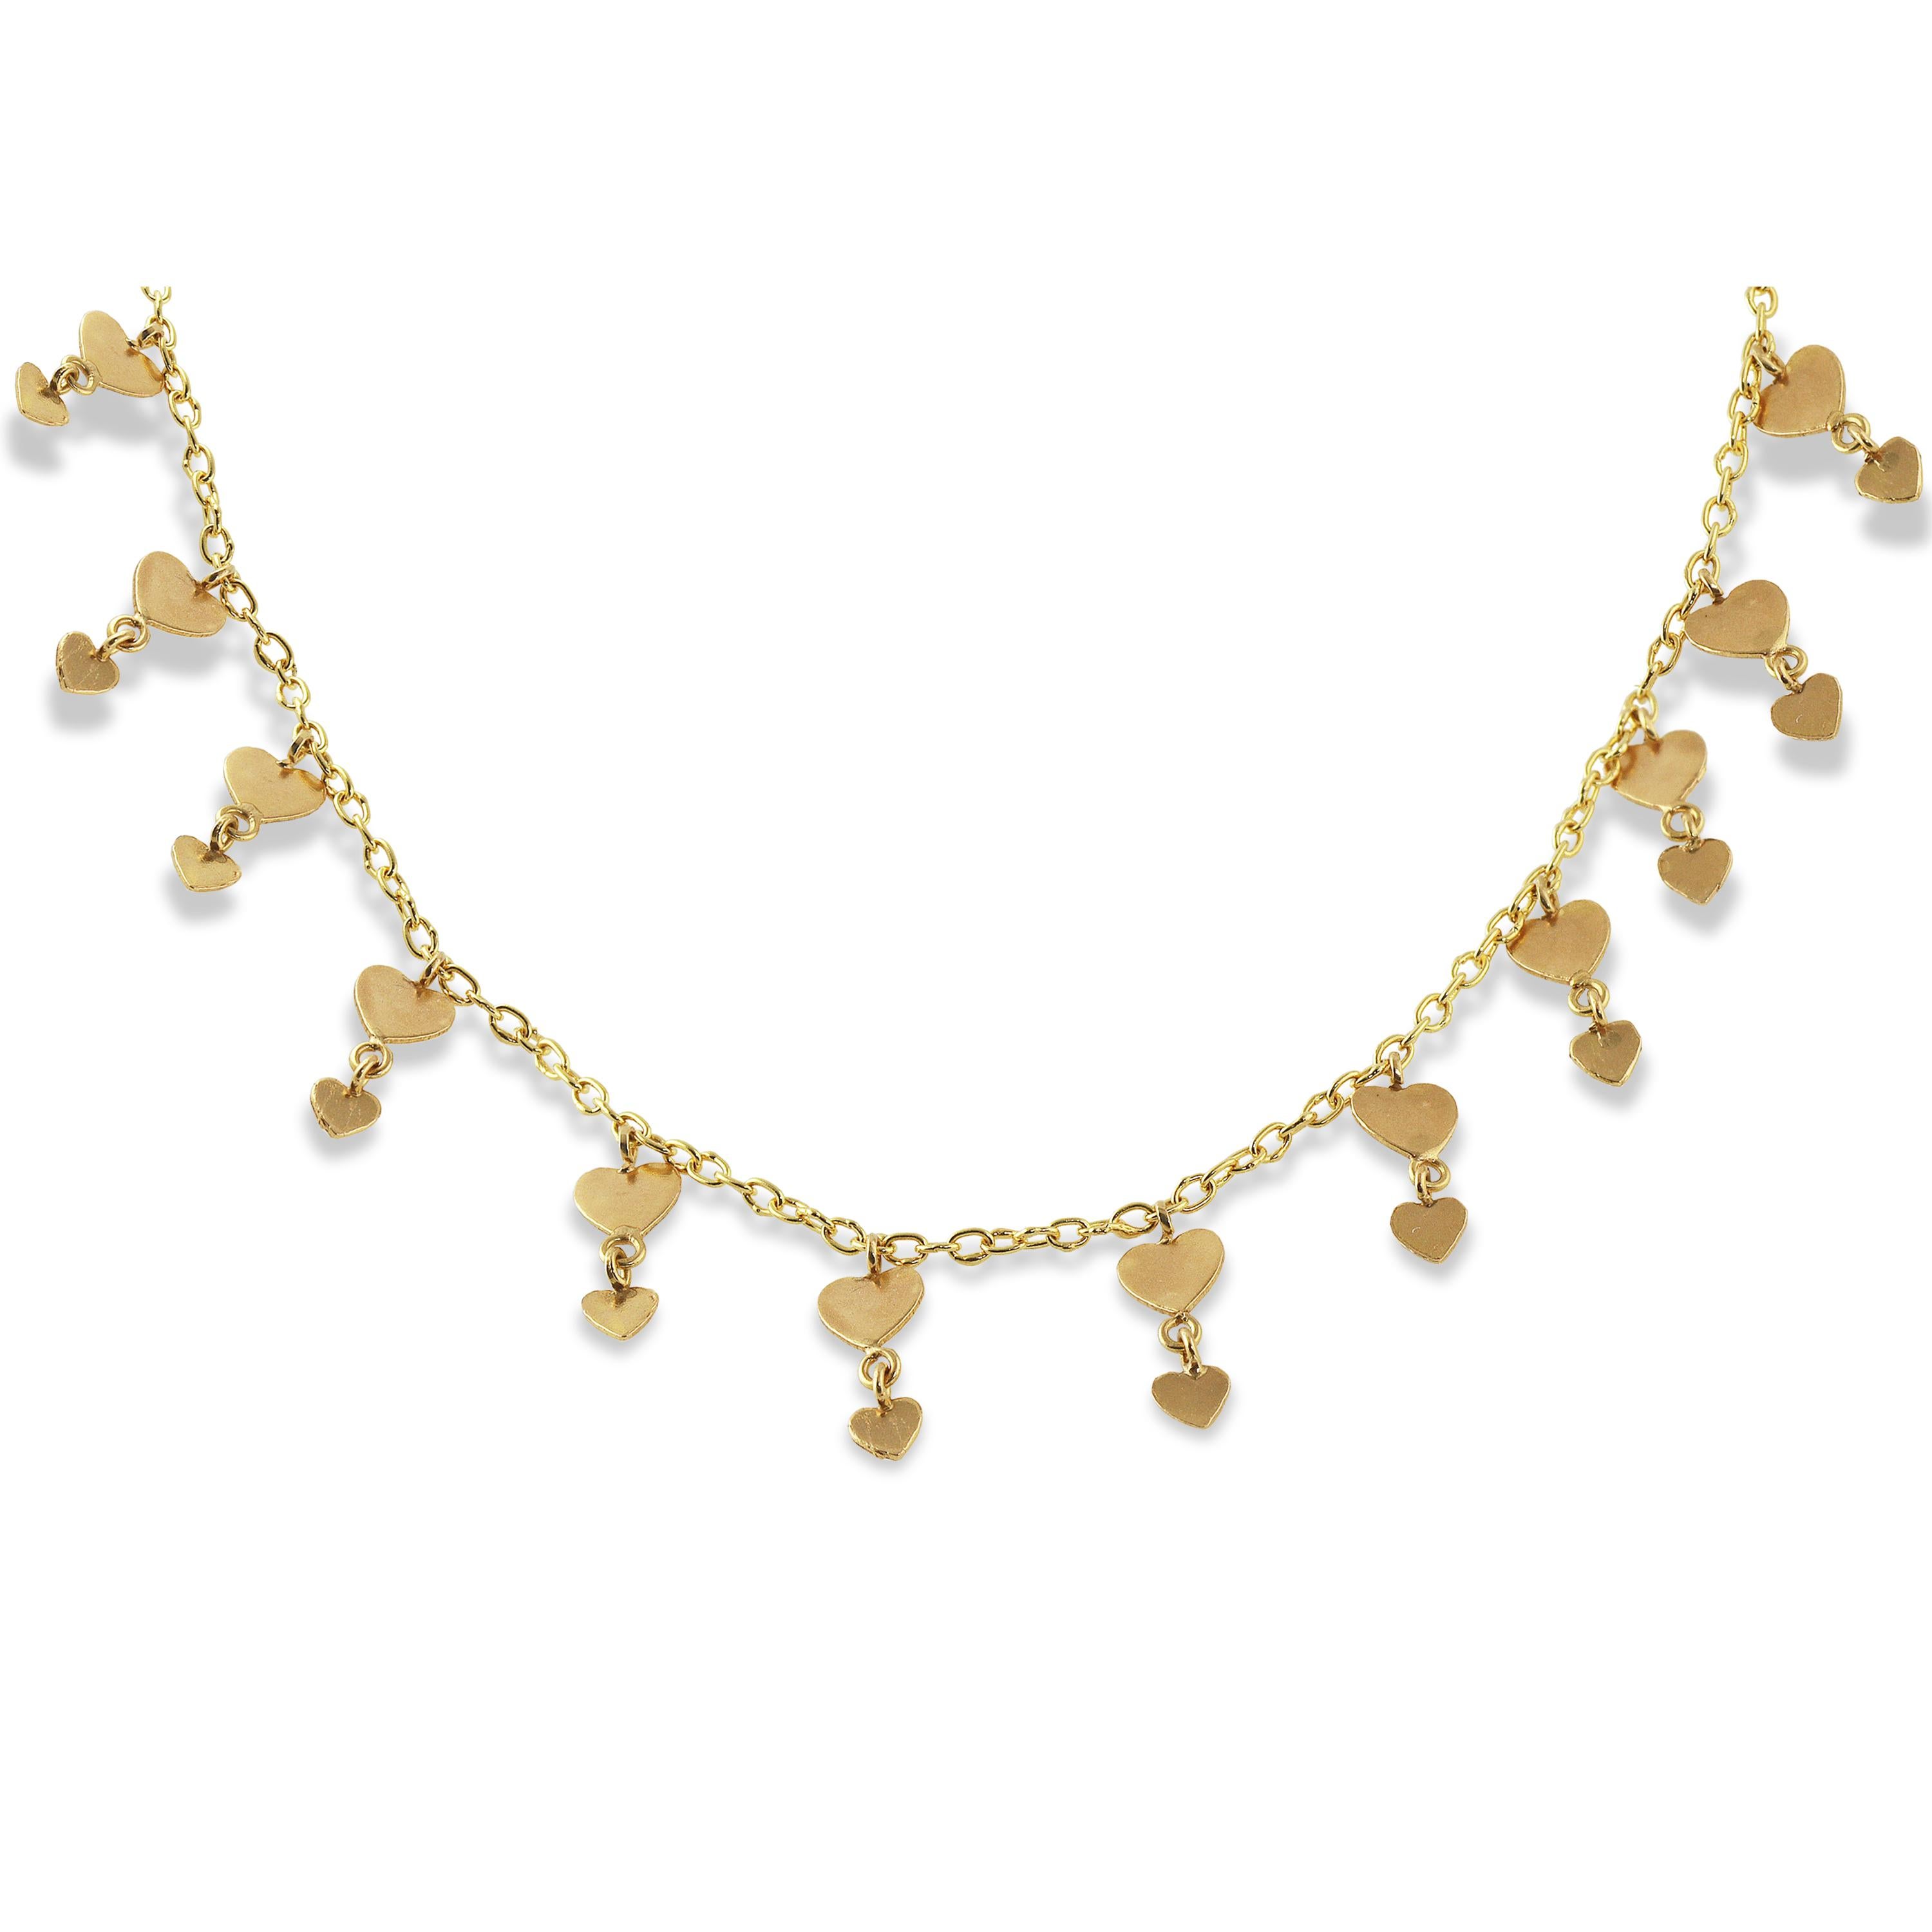 Fifty-four, eye-catching 22k gold sequins are featured in the exquisite necklace. The necklace which features two sizes of hearts, hanging on a hand-made chain, lends a bohemian elegance to this special piece.   

The necklace, measuring 17